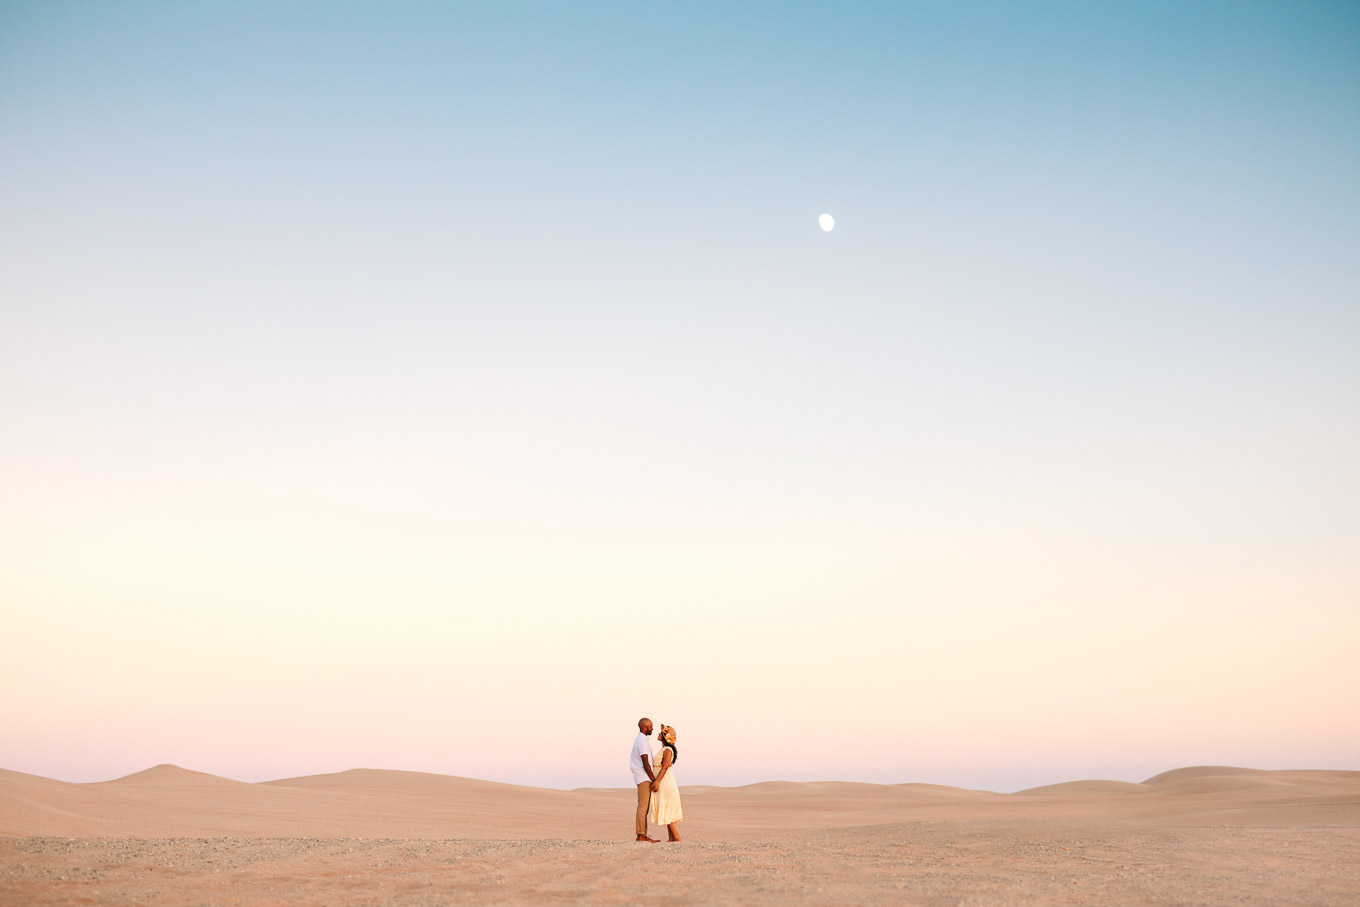 Beautiful sand dune engagement | California Sand Dunes engagement session | Colorful Palm Springs wedding photography | #palmspringsphotographer #sanddunes #engagementsession #southerncalifornia  Source: Mary Costa Photography | Los Angeles